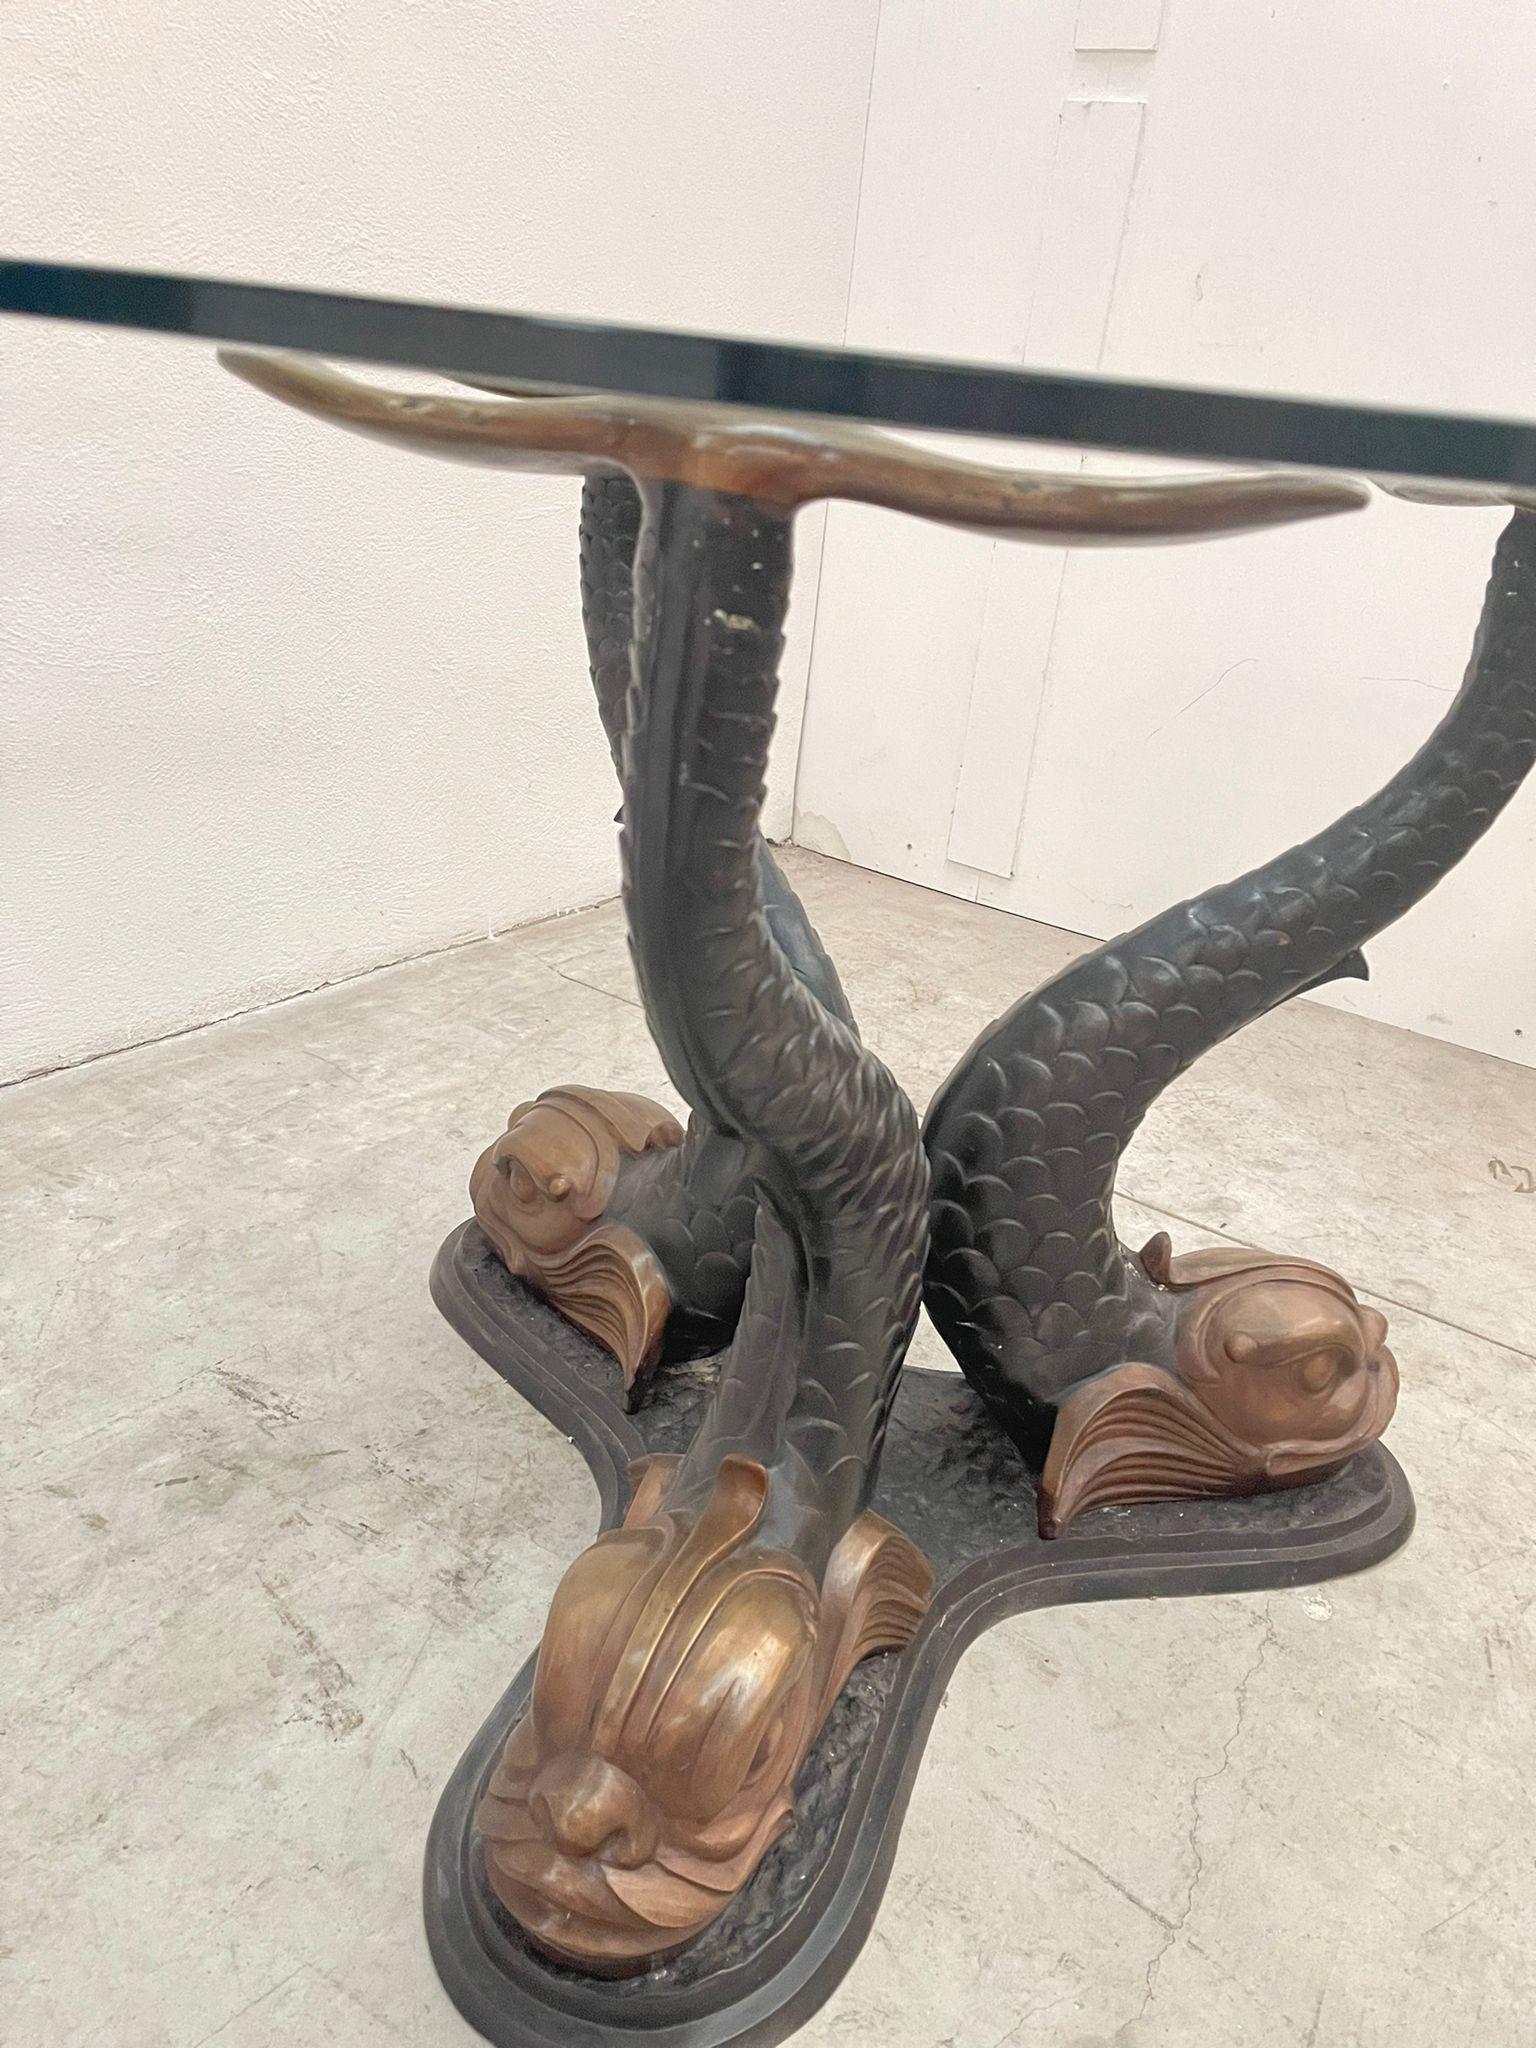 Modern table made in Italy. The upper part is made of glass resting on worked brass which depicts 3 animals made in the smallest detail. castello di nelson famous vetro tavolo.

Replica de Mice Versailles.